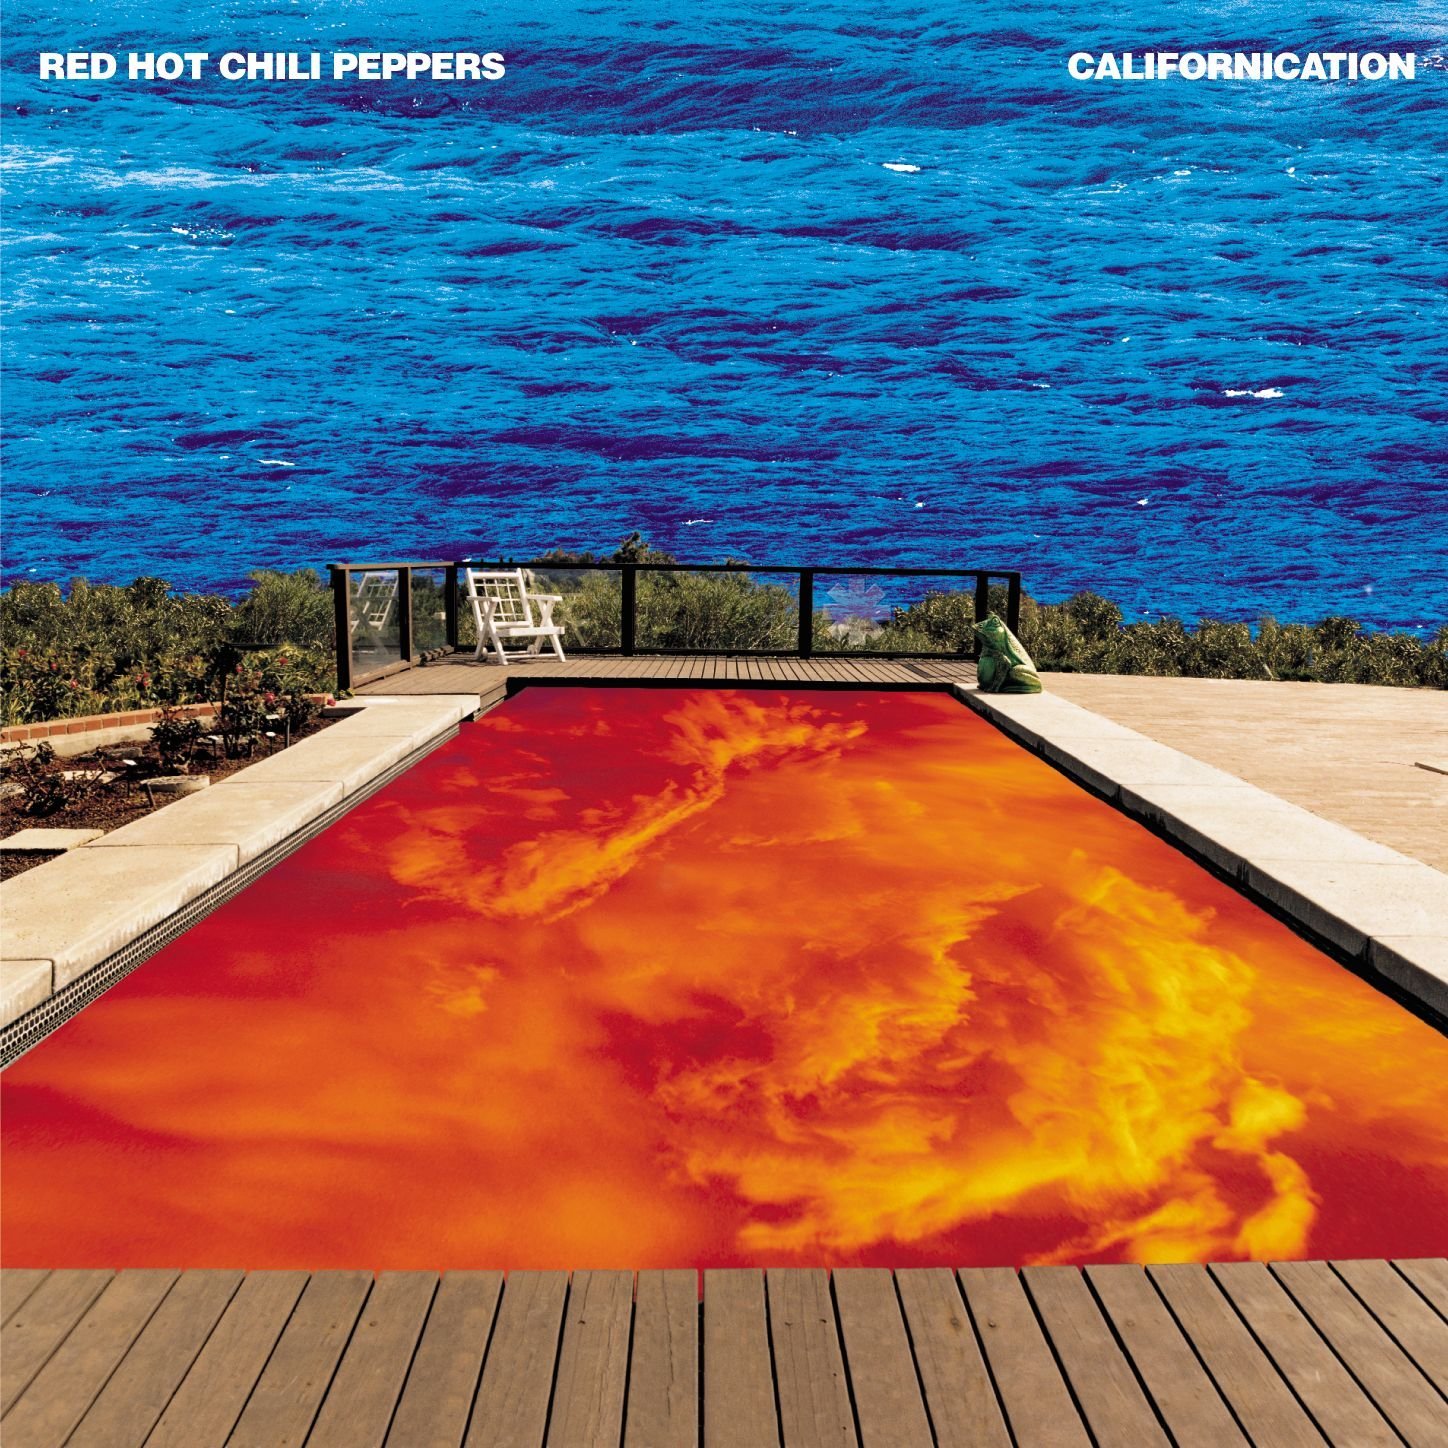 20 Albums, 20 Days: Red Hot Chili Peppers ‘Californication’